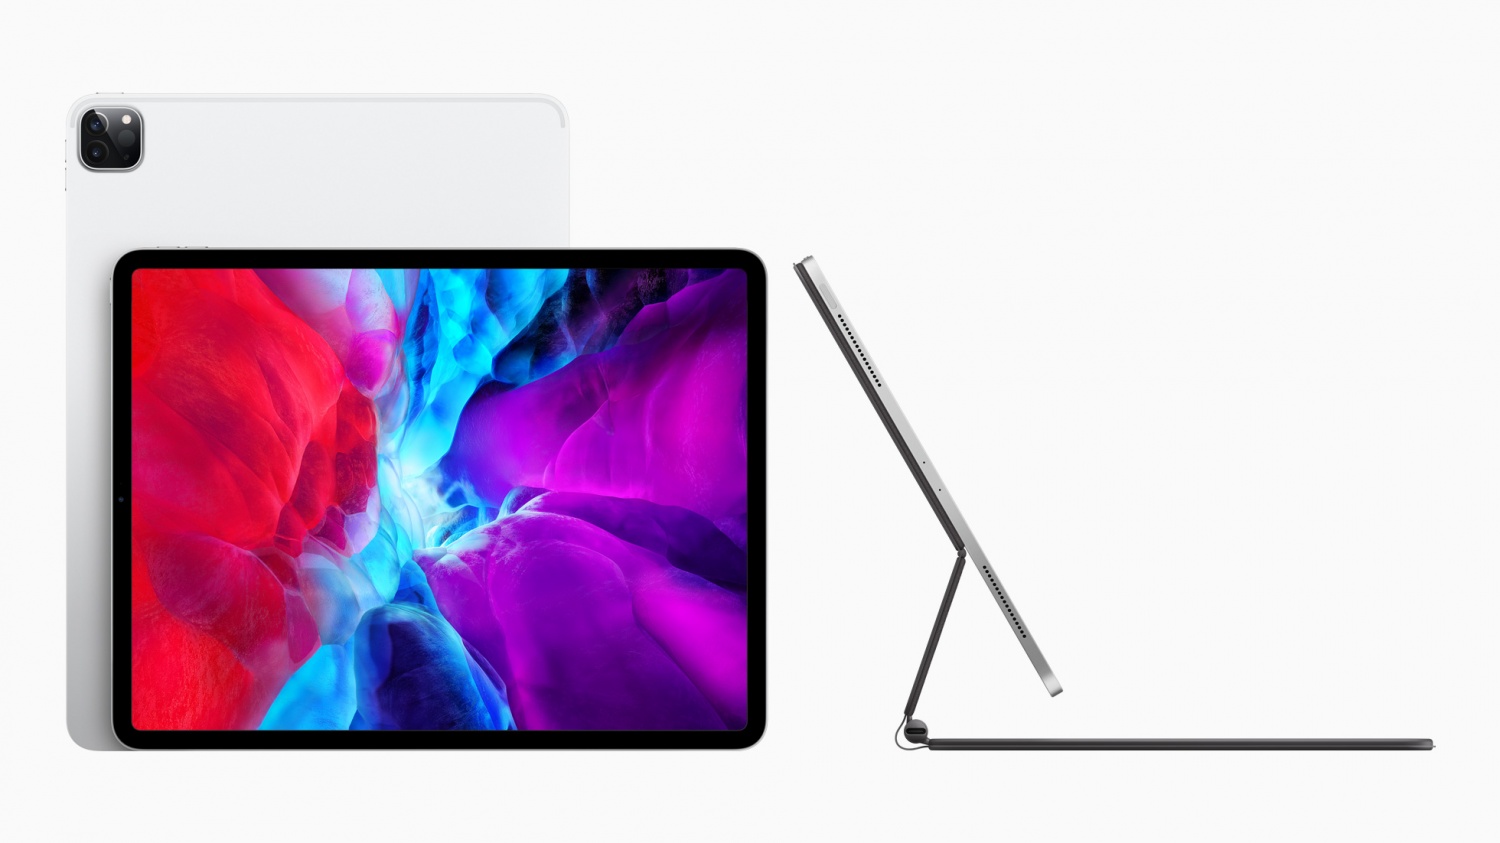 apple-ipad-pro-2022-wireless-charging-apple-logo-to-soon-bring-feature-glass-finish-on-back